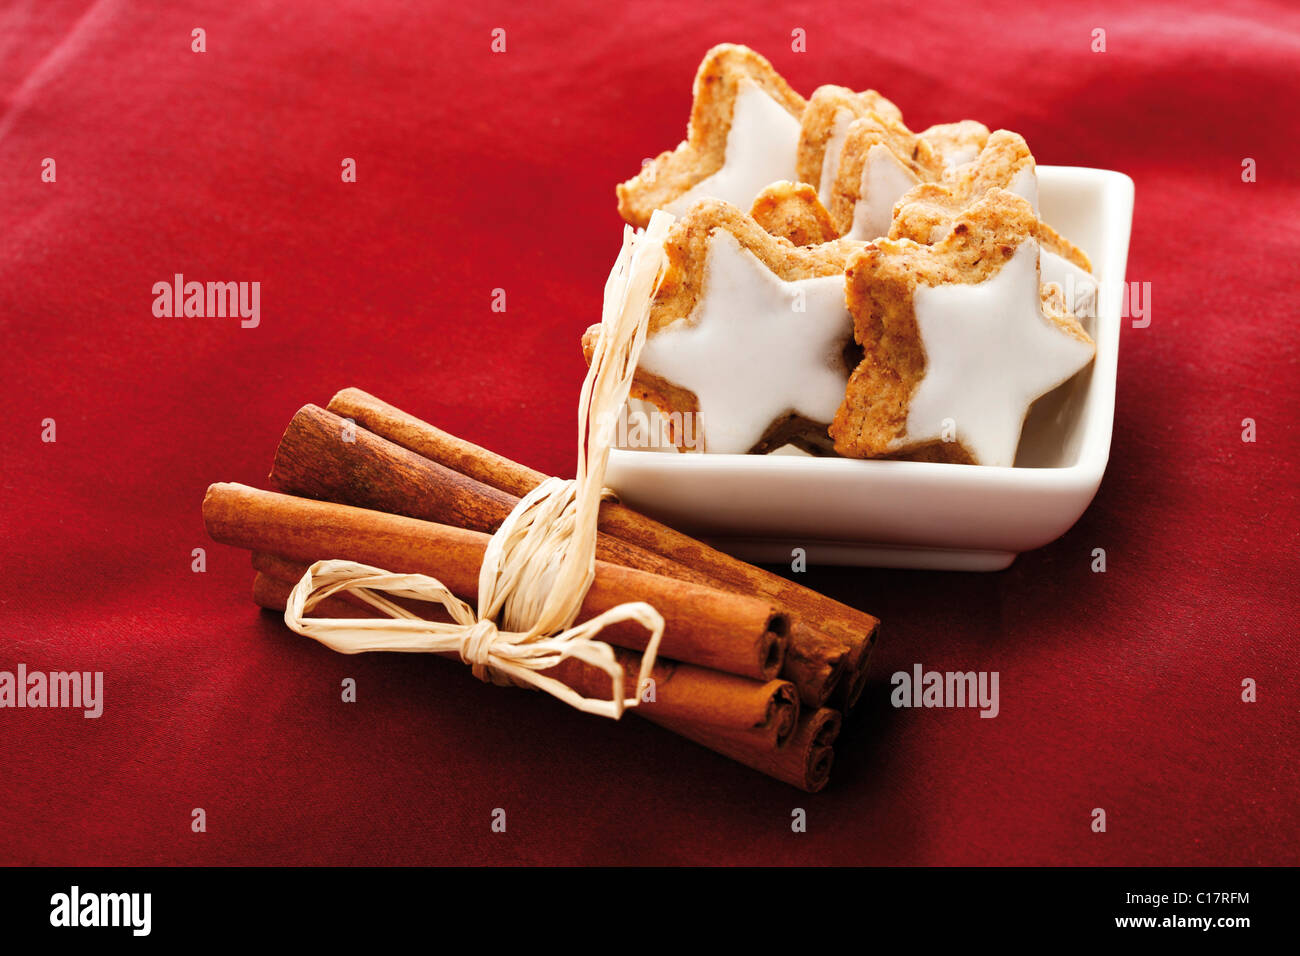 Cinnammon star-shaped biscuits and bundle of cinnammon sticks on red velvet Stock Photo